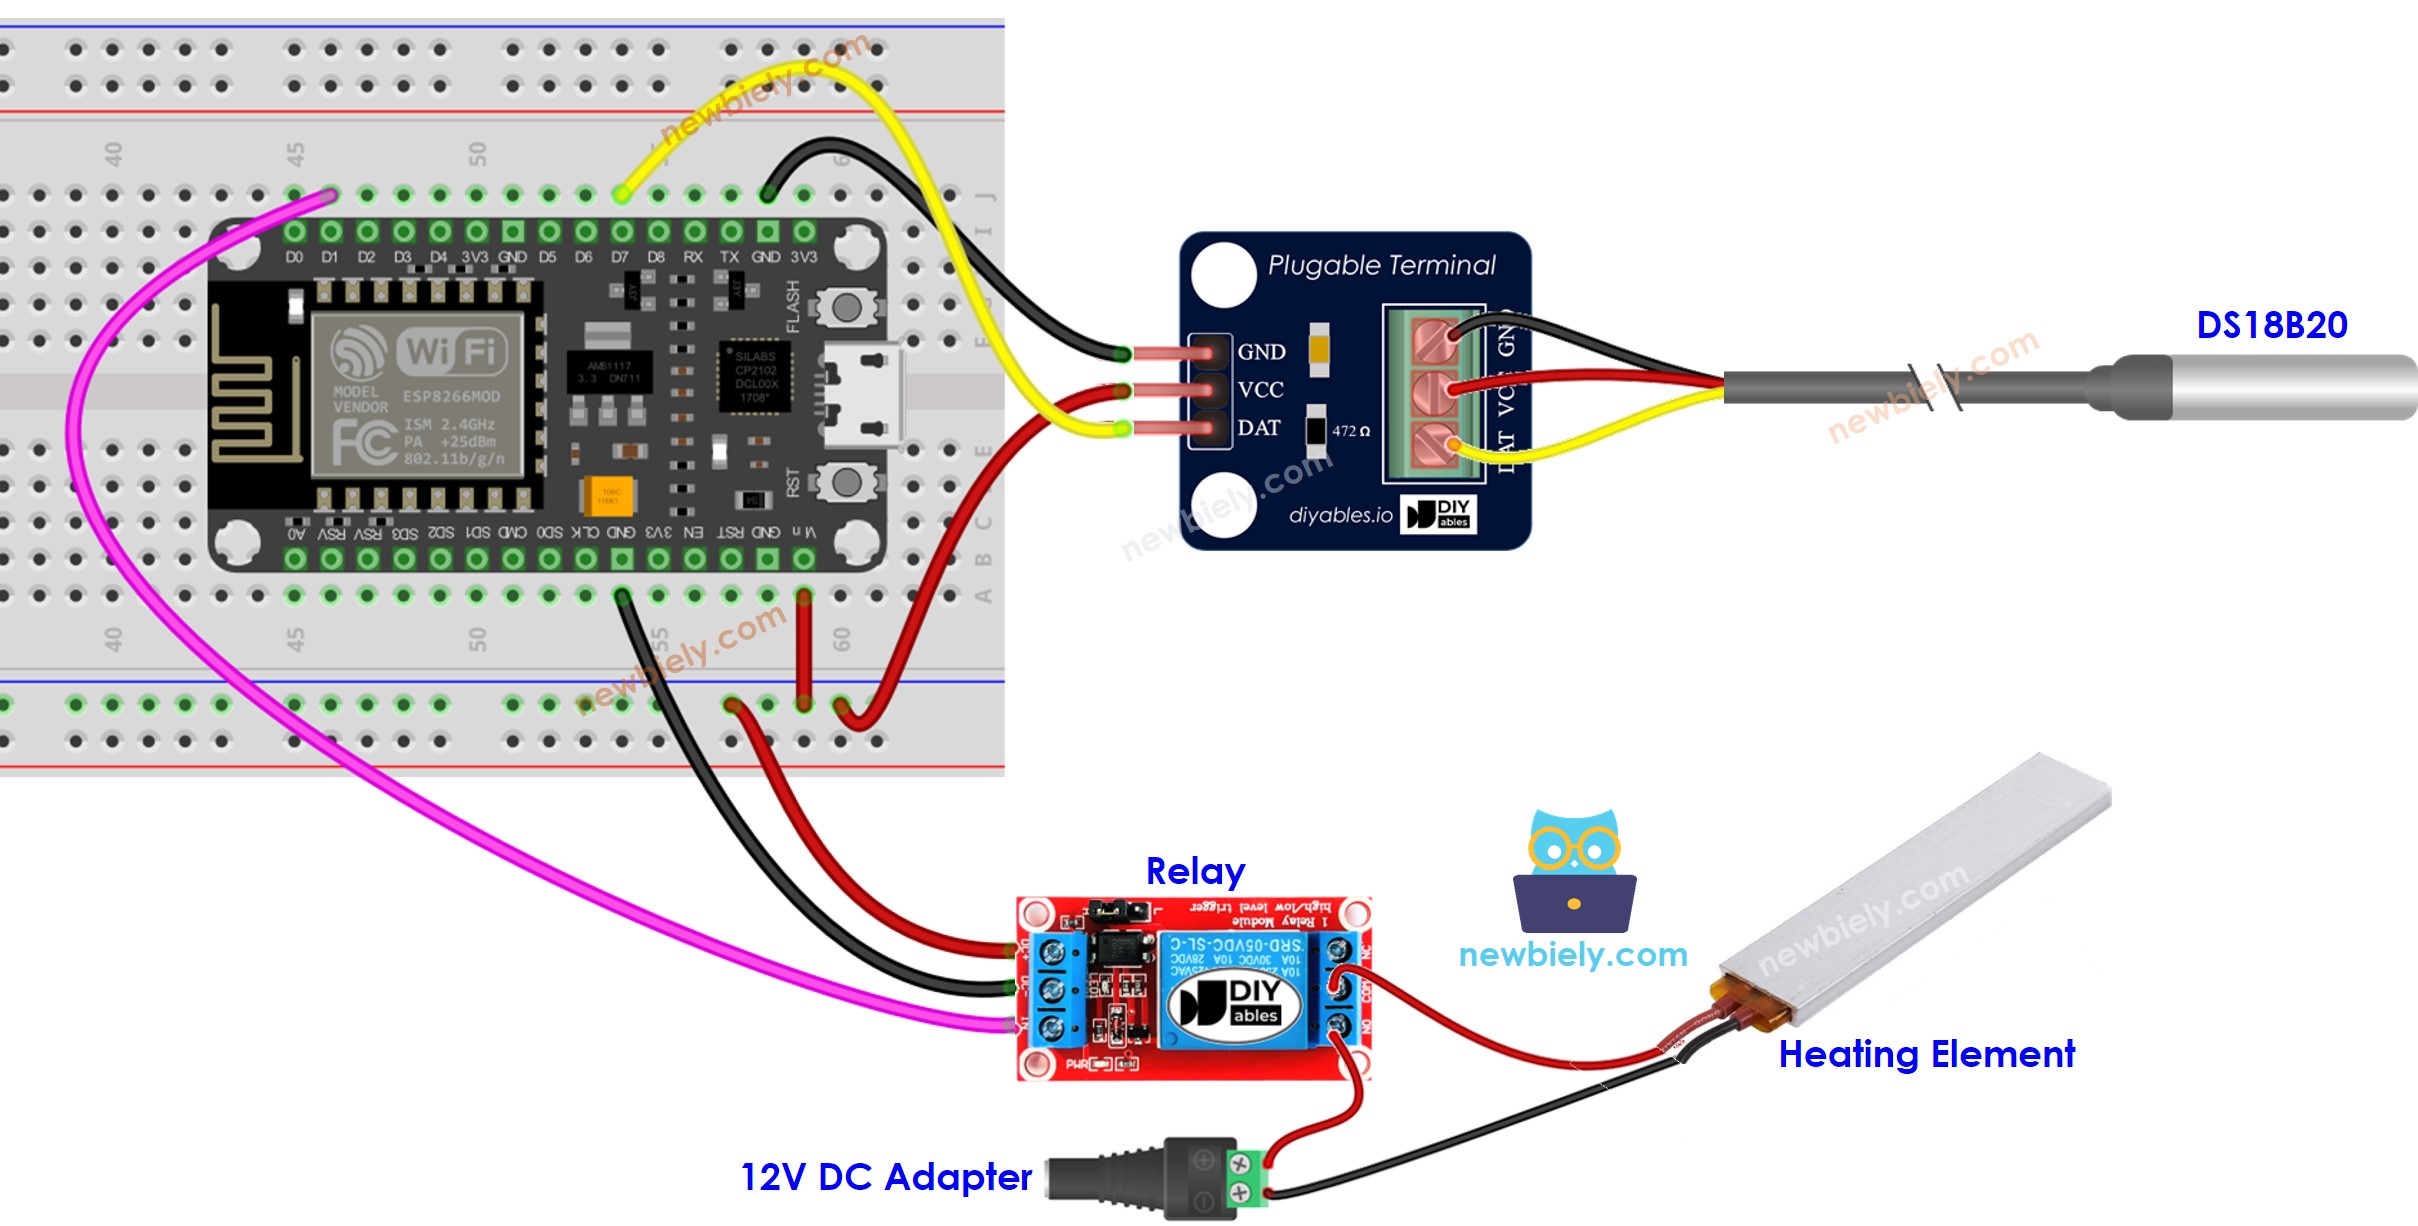 The wiring diagram between ESP8266 NodeMCU and heating system